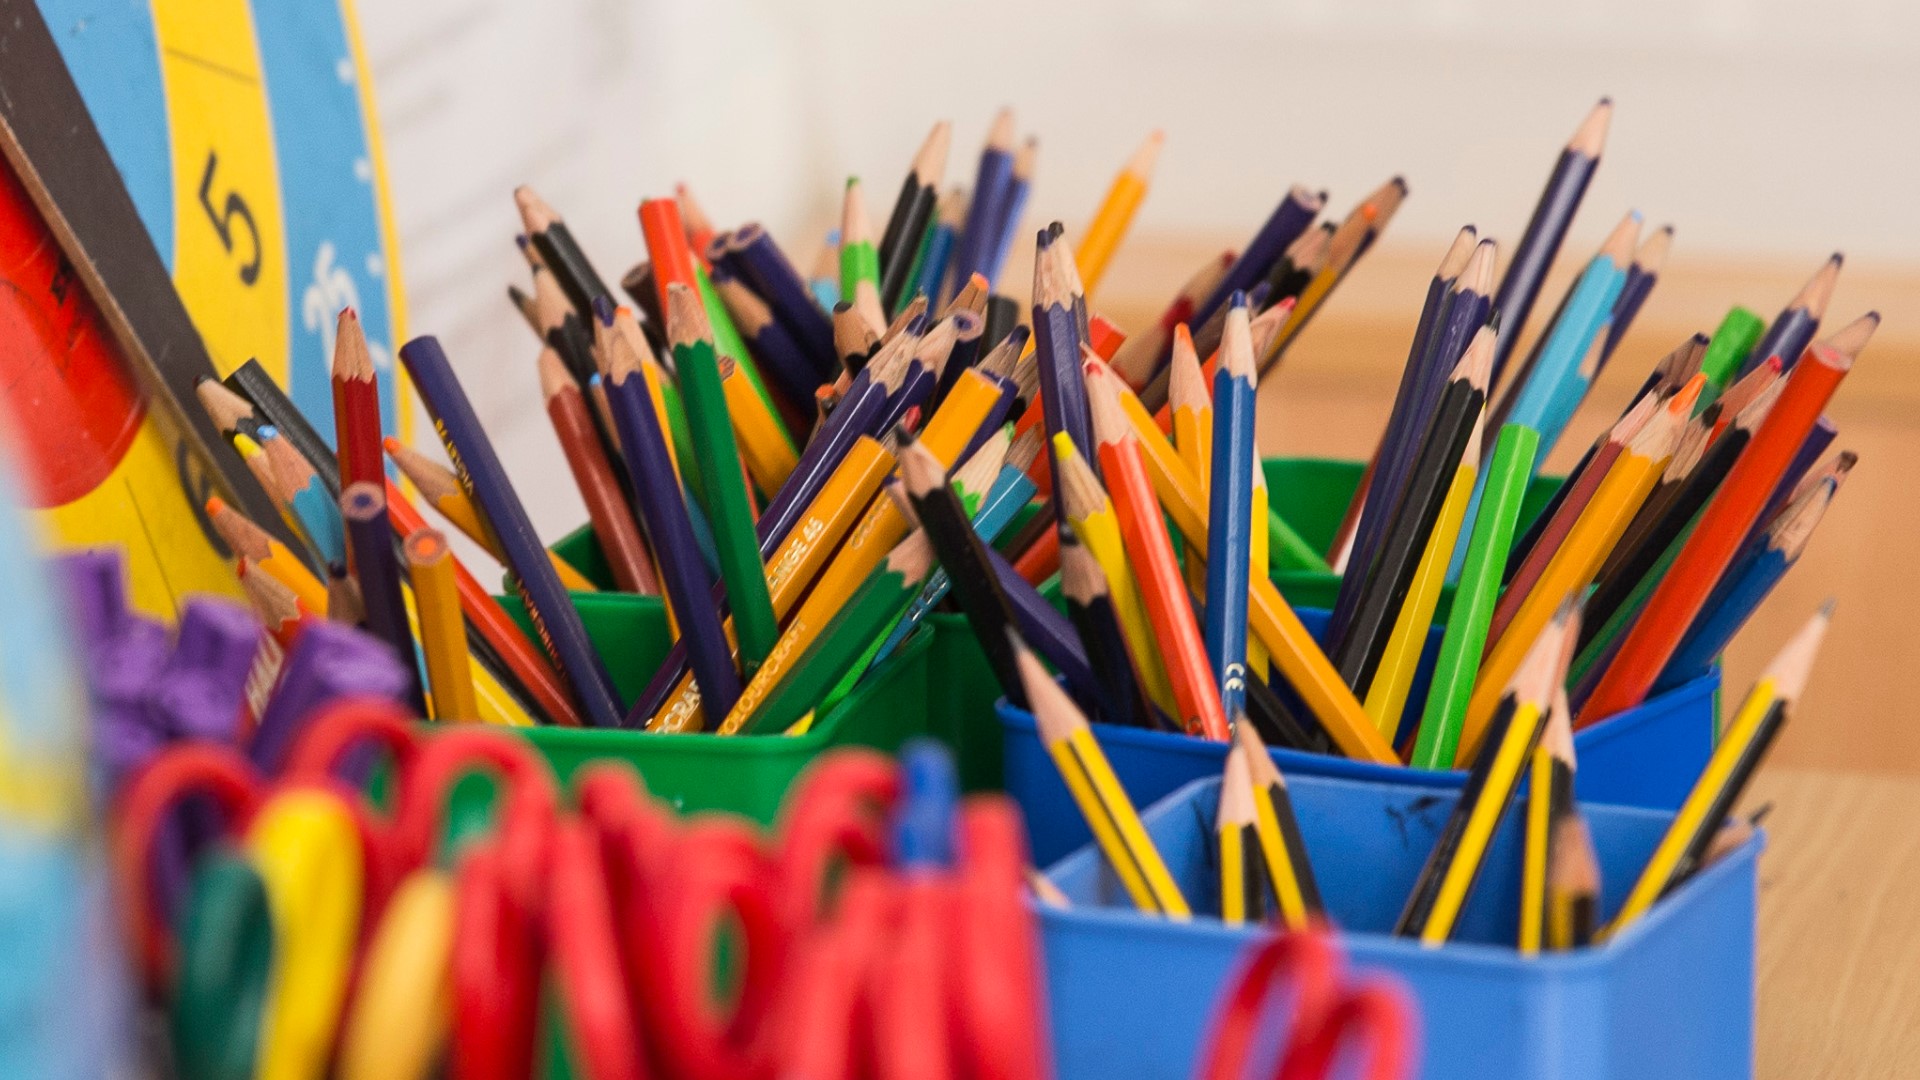 It's not too early to get ready to shop for supplies for the upcoming school year.